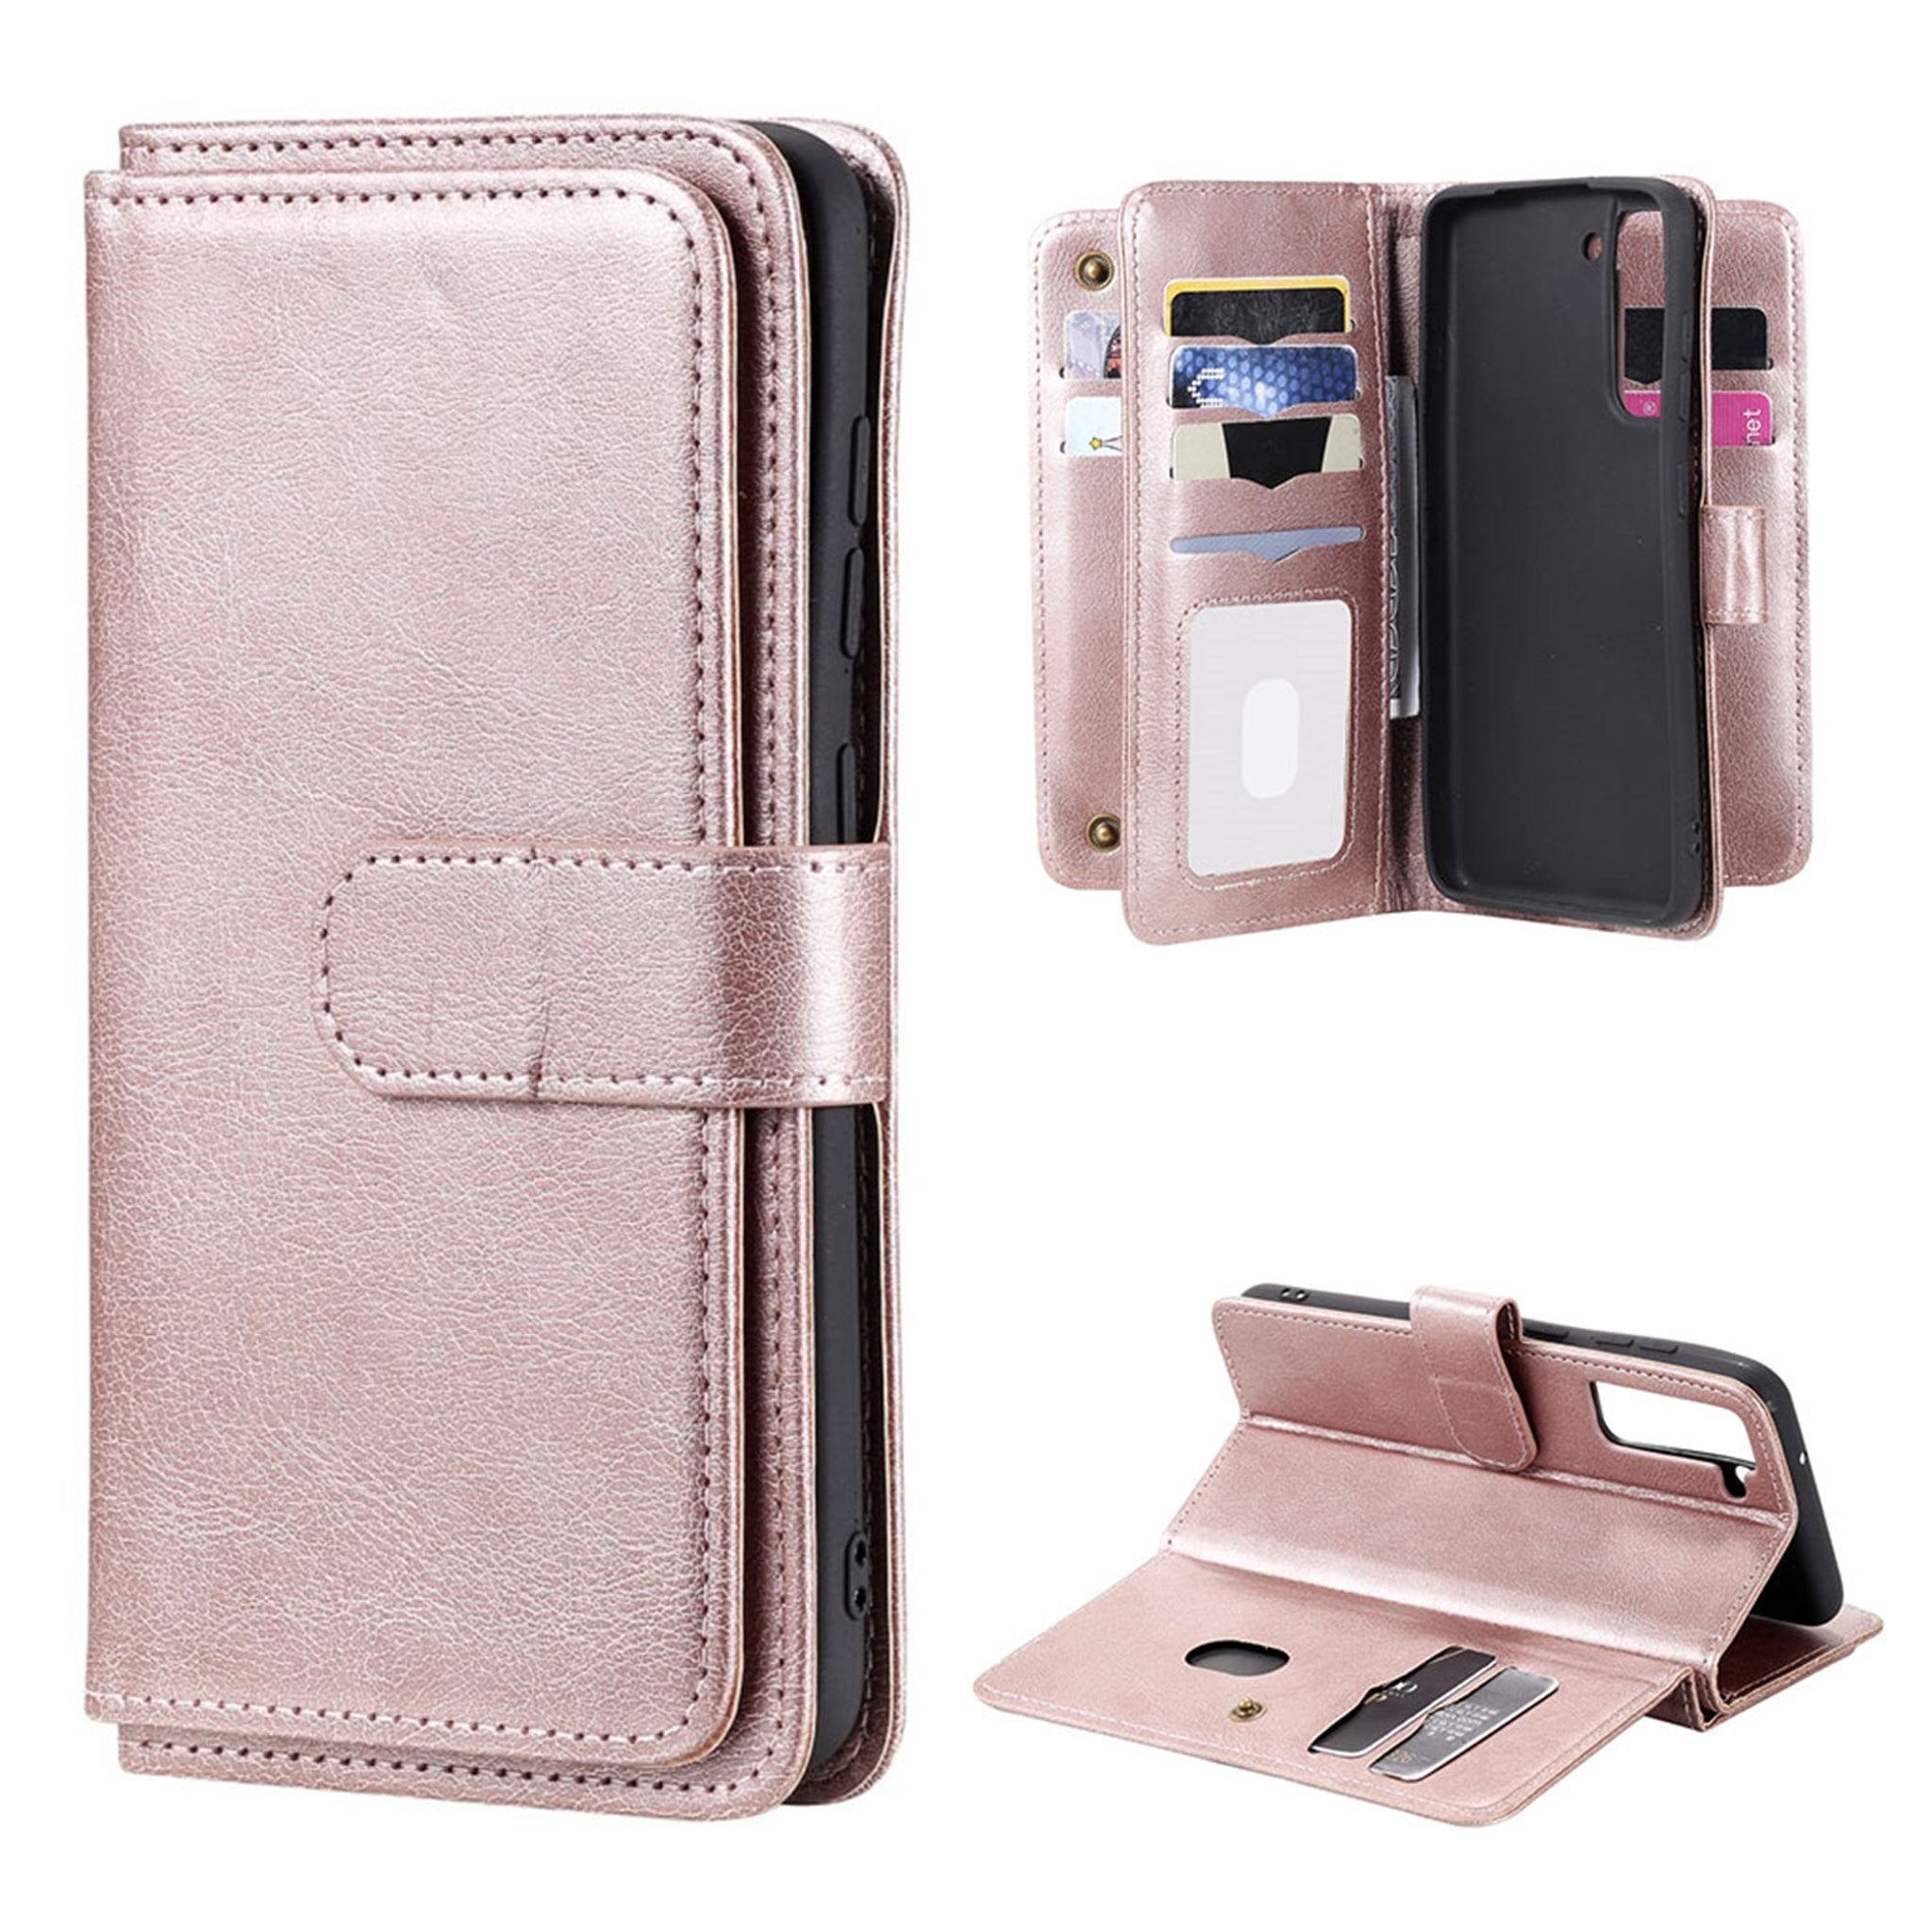 10-slot wallet case for Samsung Galaxy S21 FE - Rose Gold